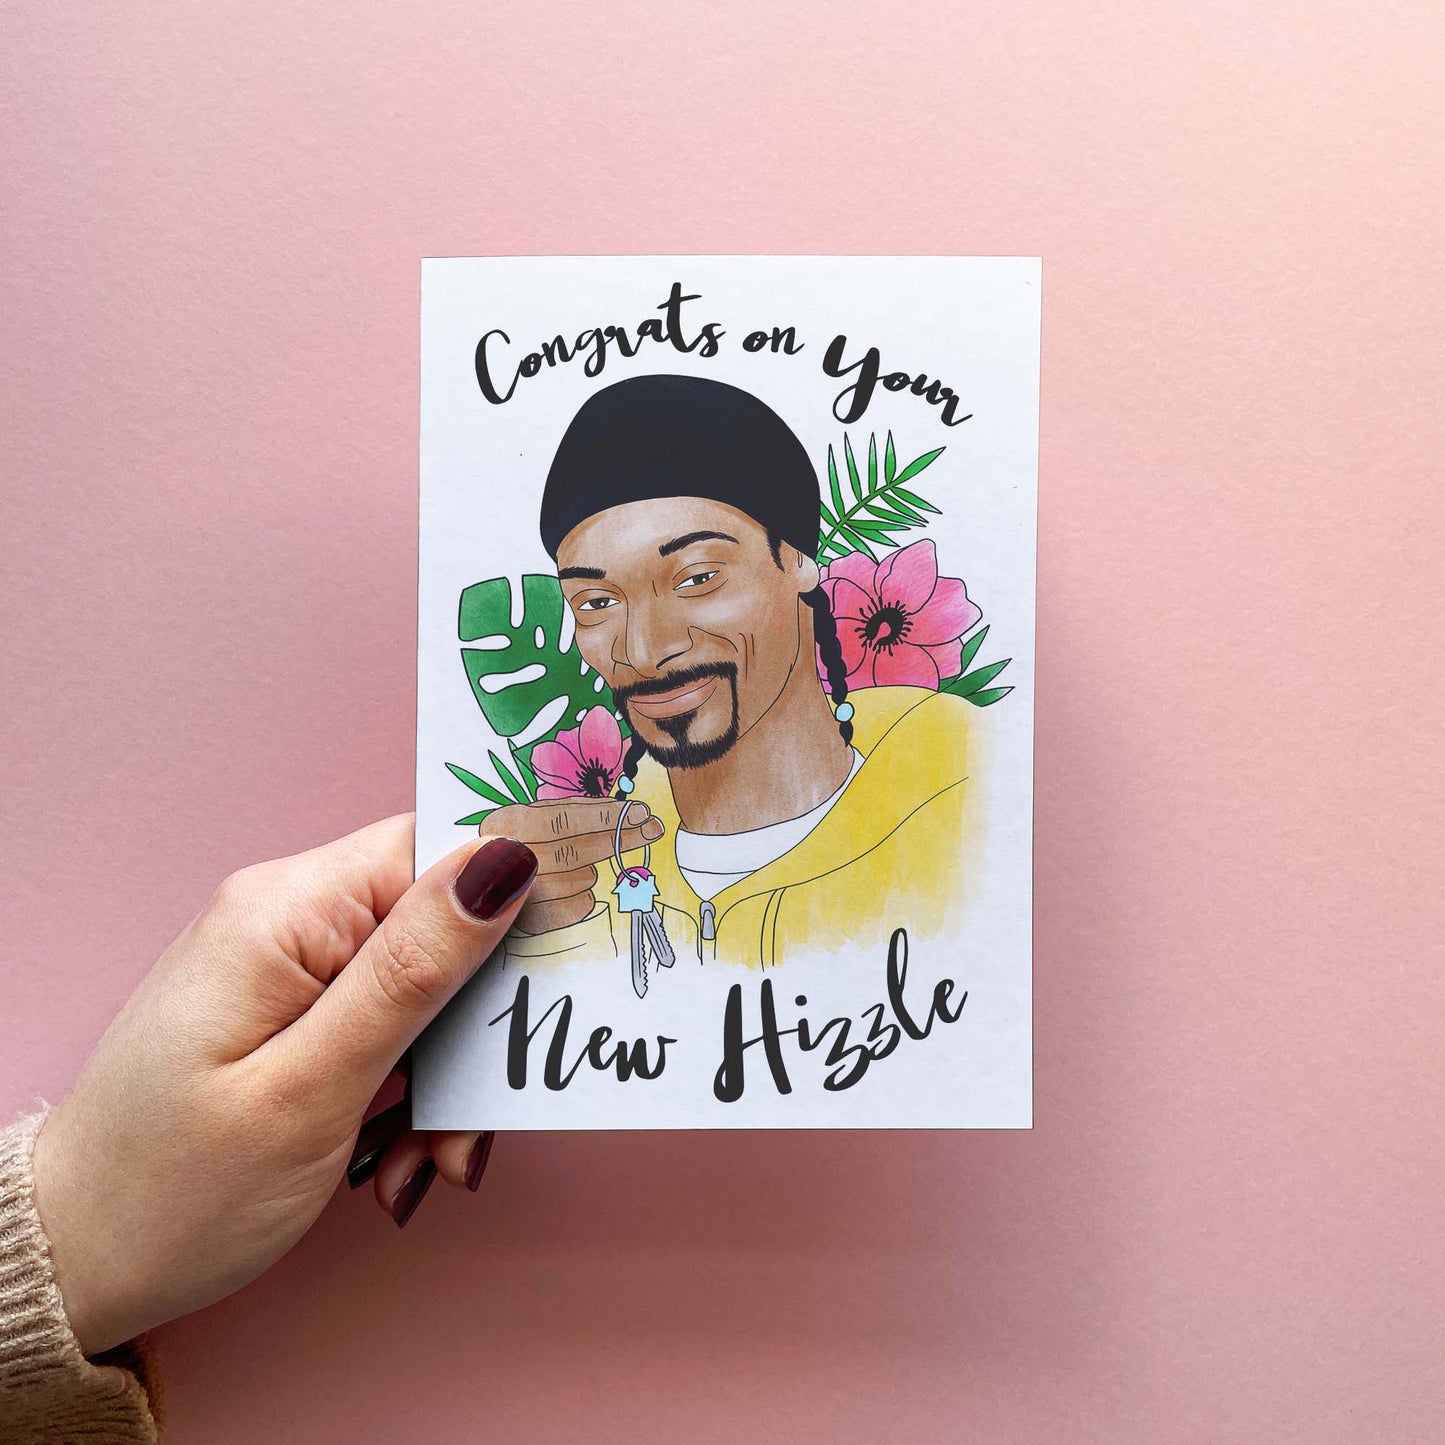 Congrats On Your New Hizzle Card - New Home Card